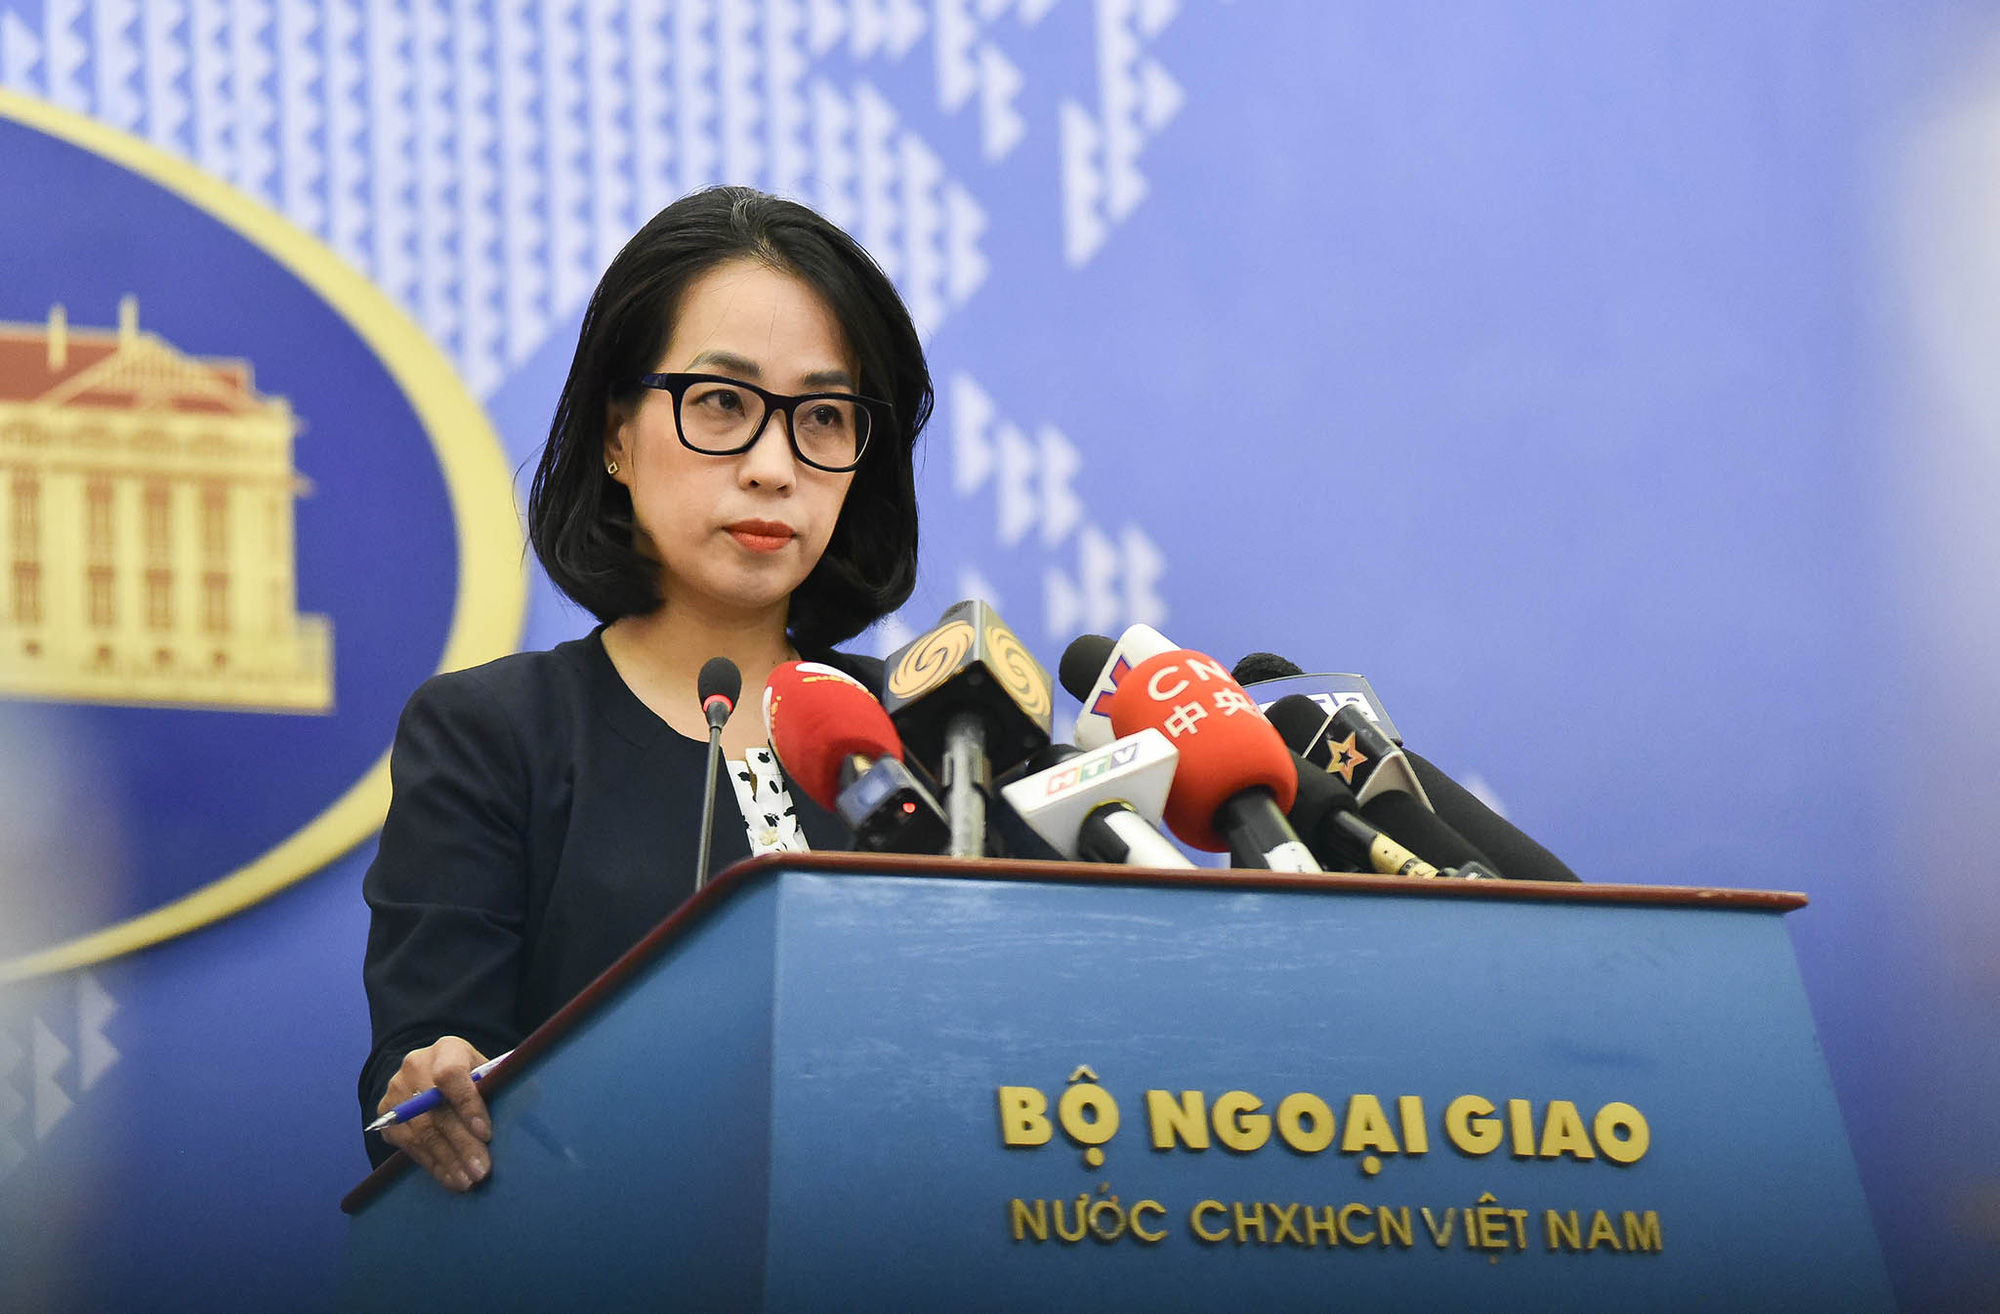 Vietnam asks China to respect Gulf of Tonkin delimitation agreement